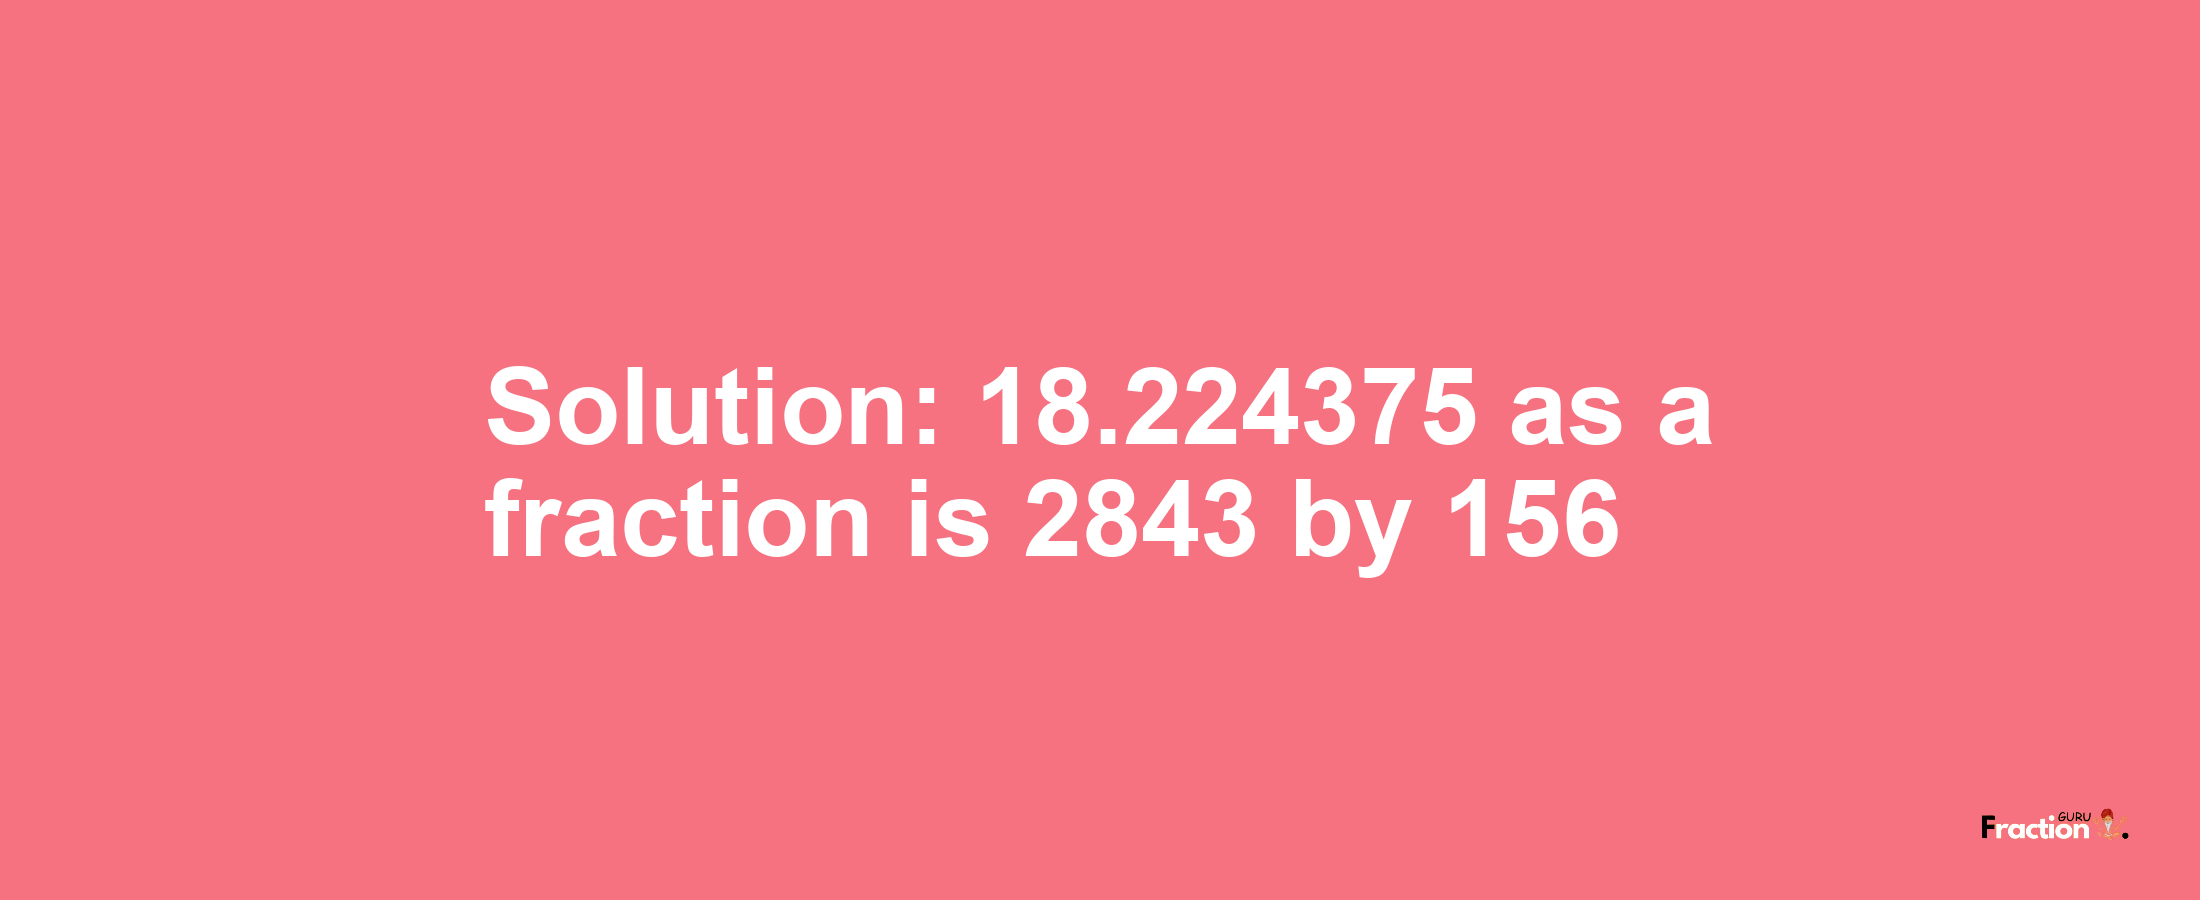 Solution:18.224375 as a fraction is 2843/156